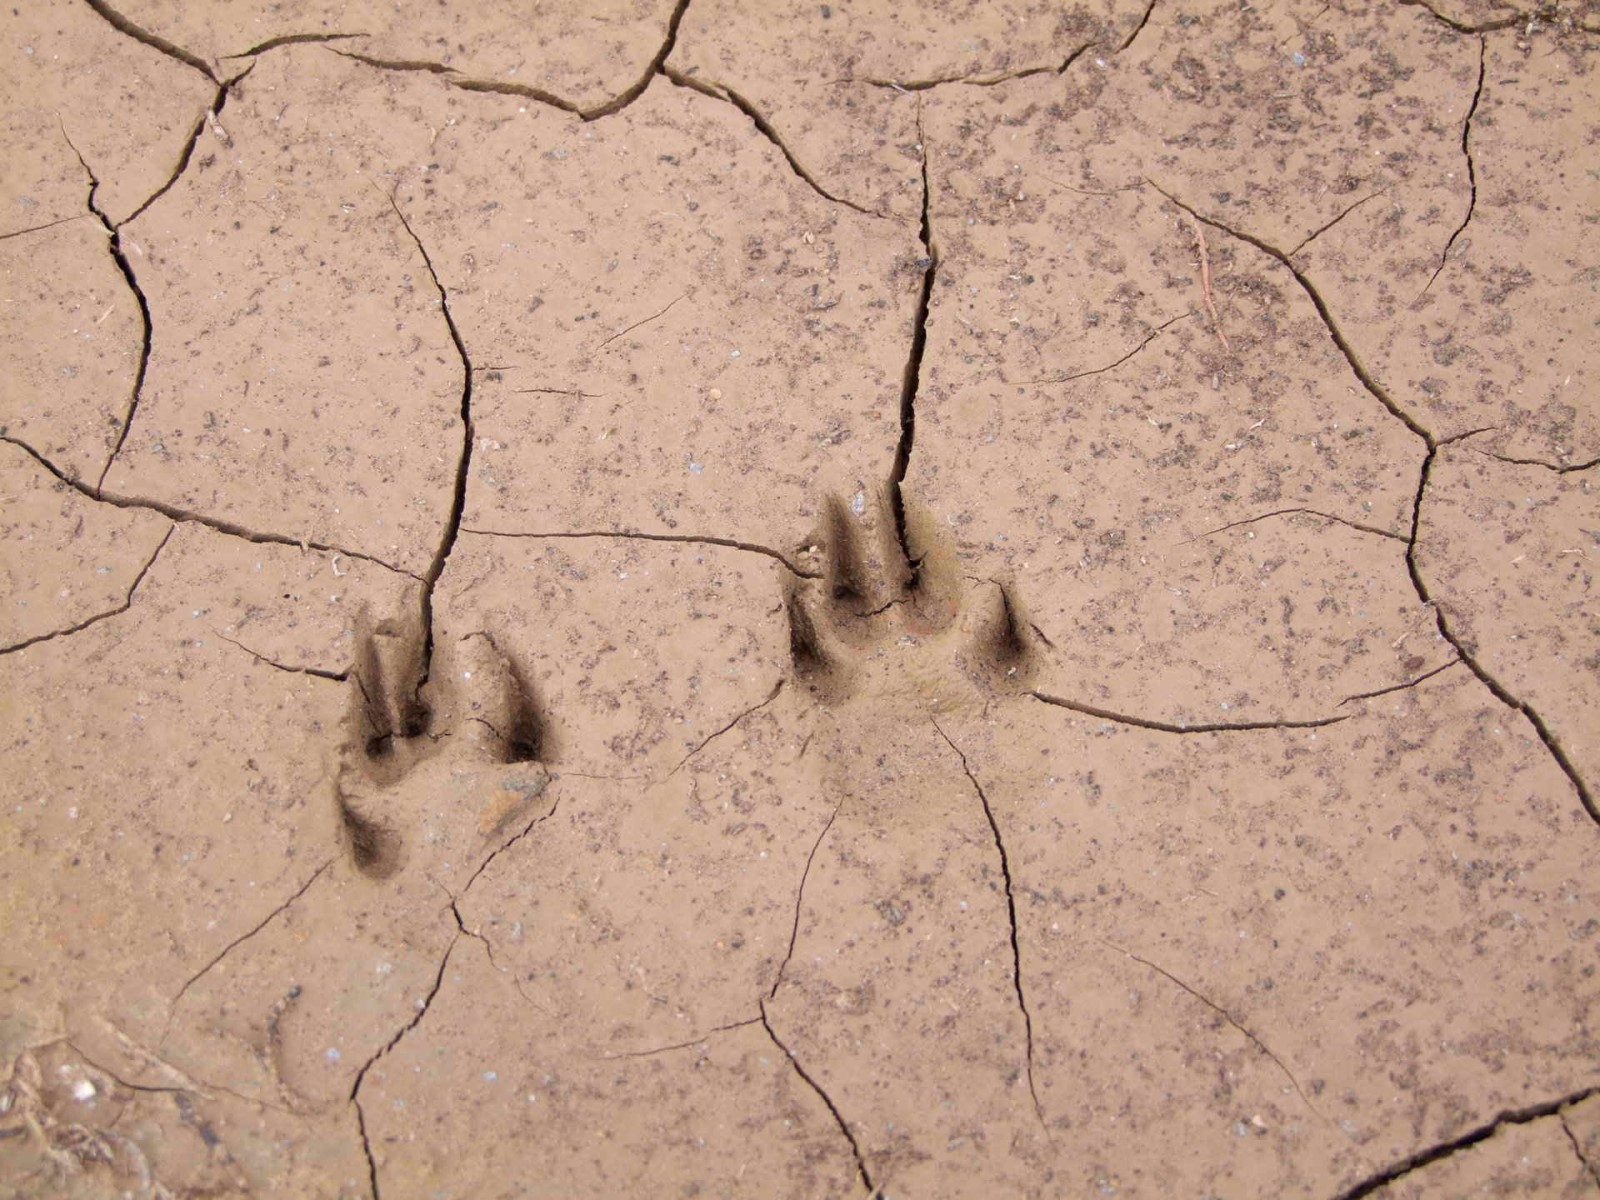 Footprints in the ground